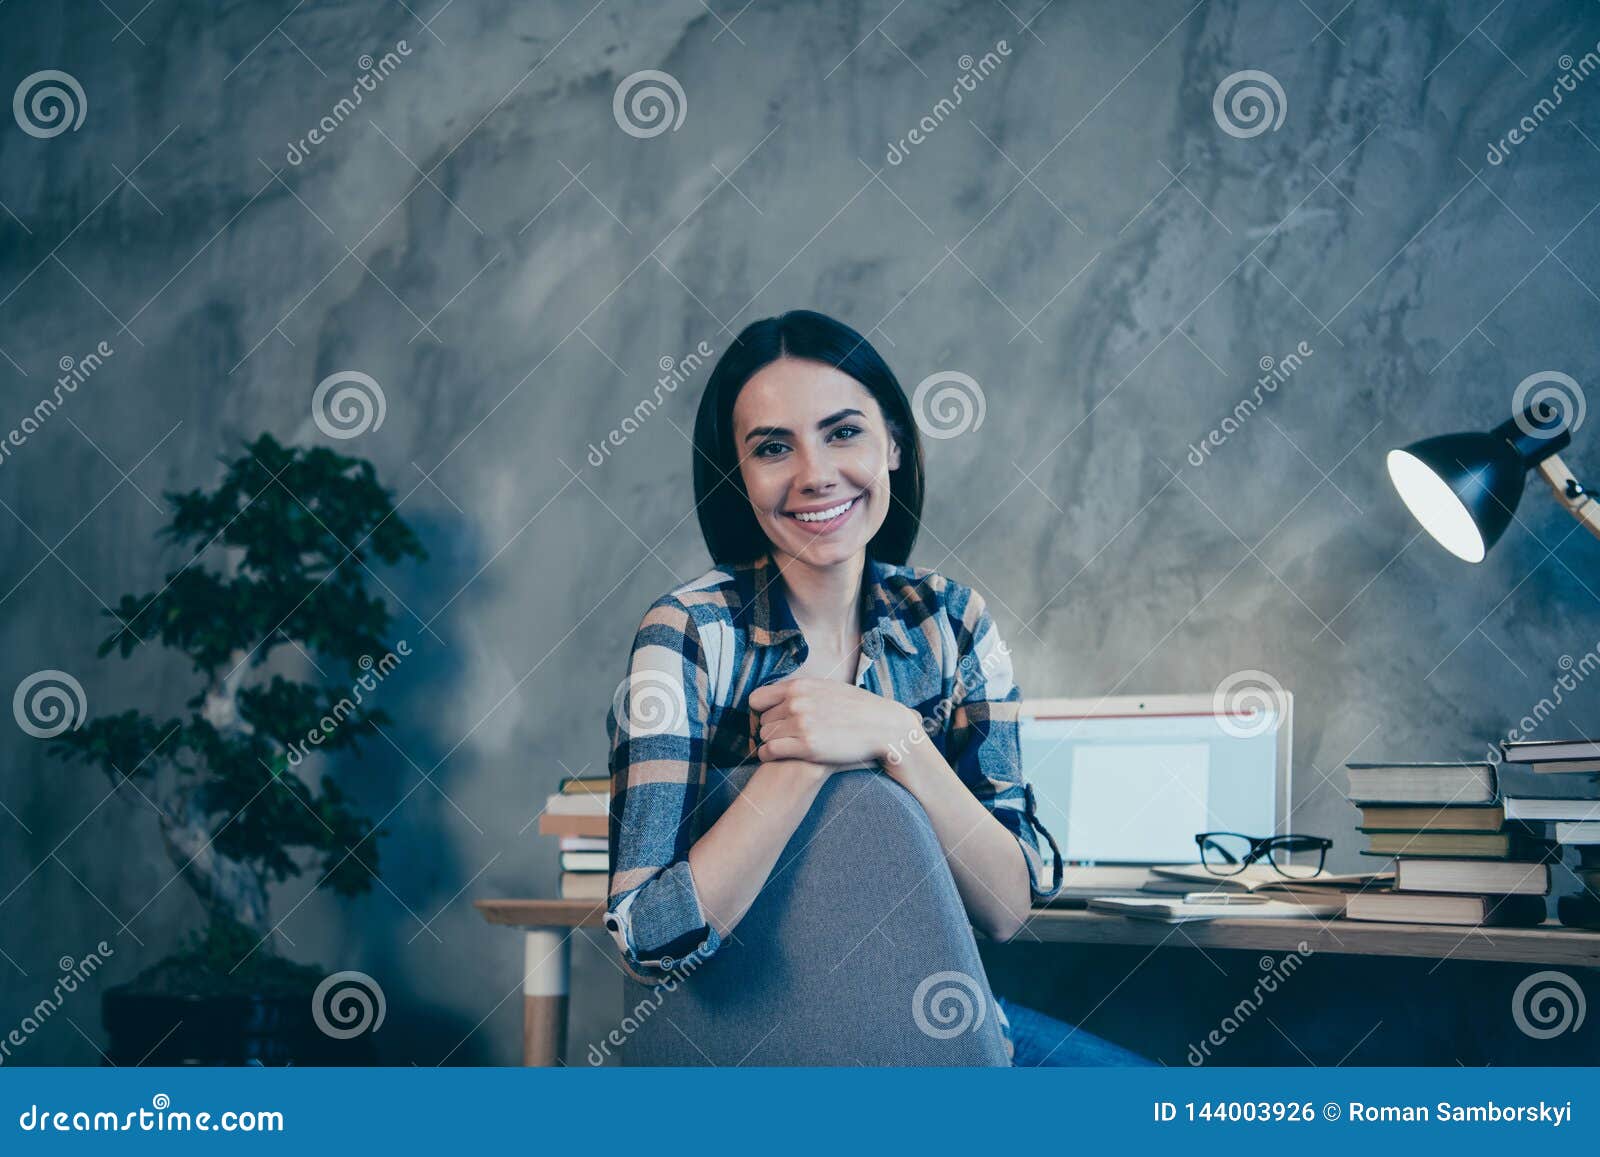 Portrait Of Her She Nice Attractive Cheerful Cheery Brunette Lady In Checked Shirt Marketing 